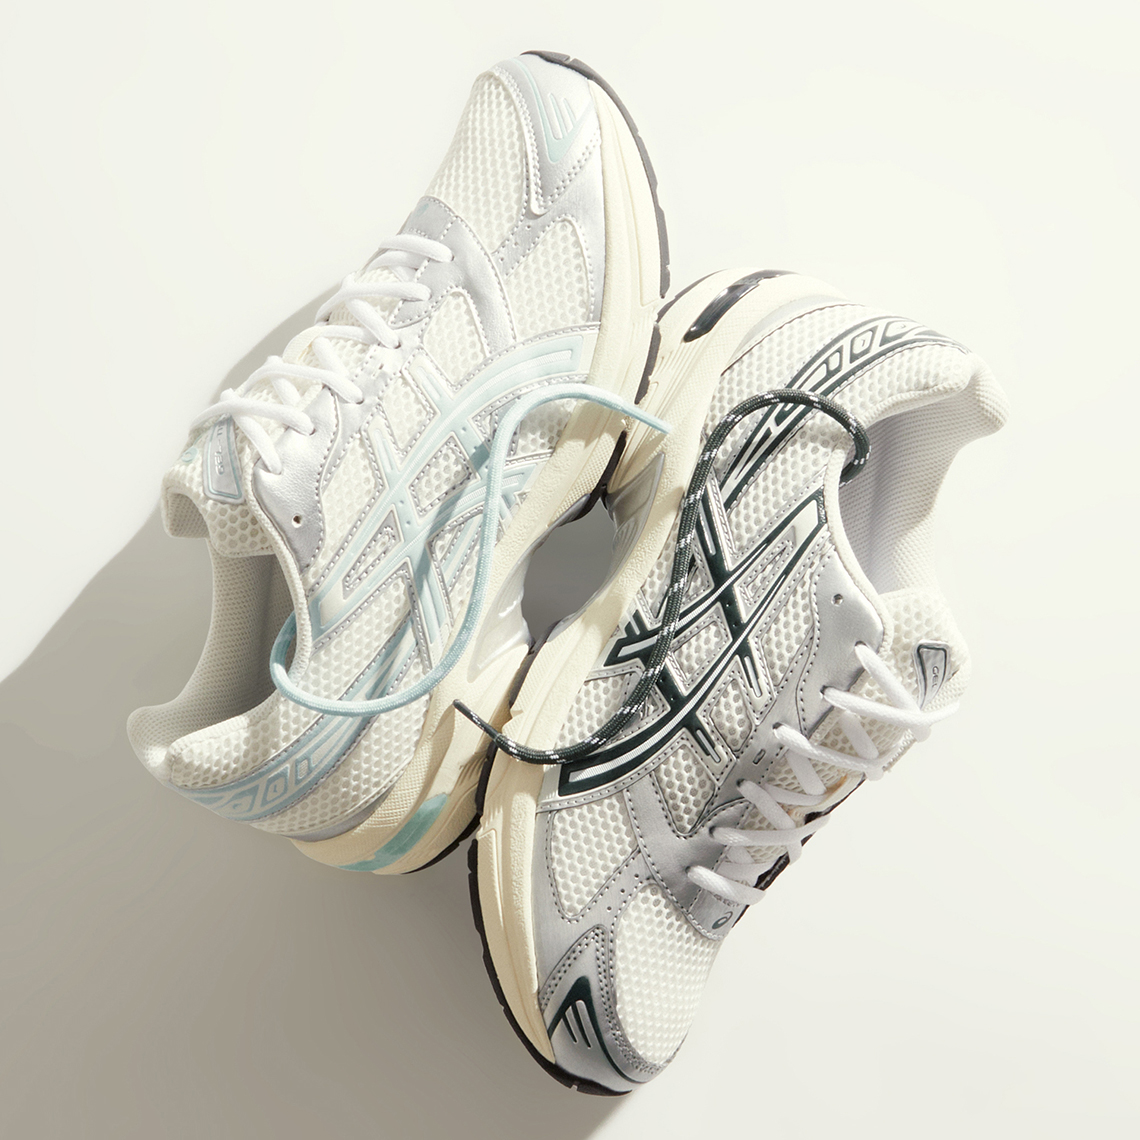 Kith Asics Vintage Tech 2023 Release Date 5